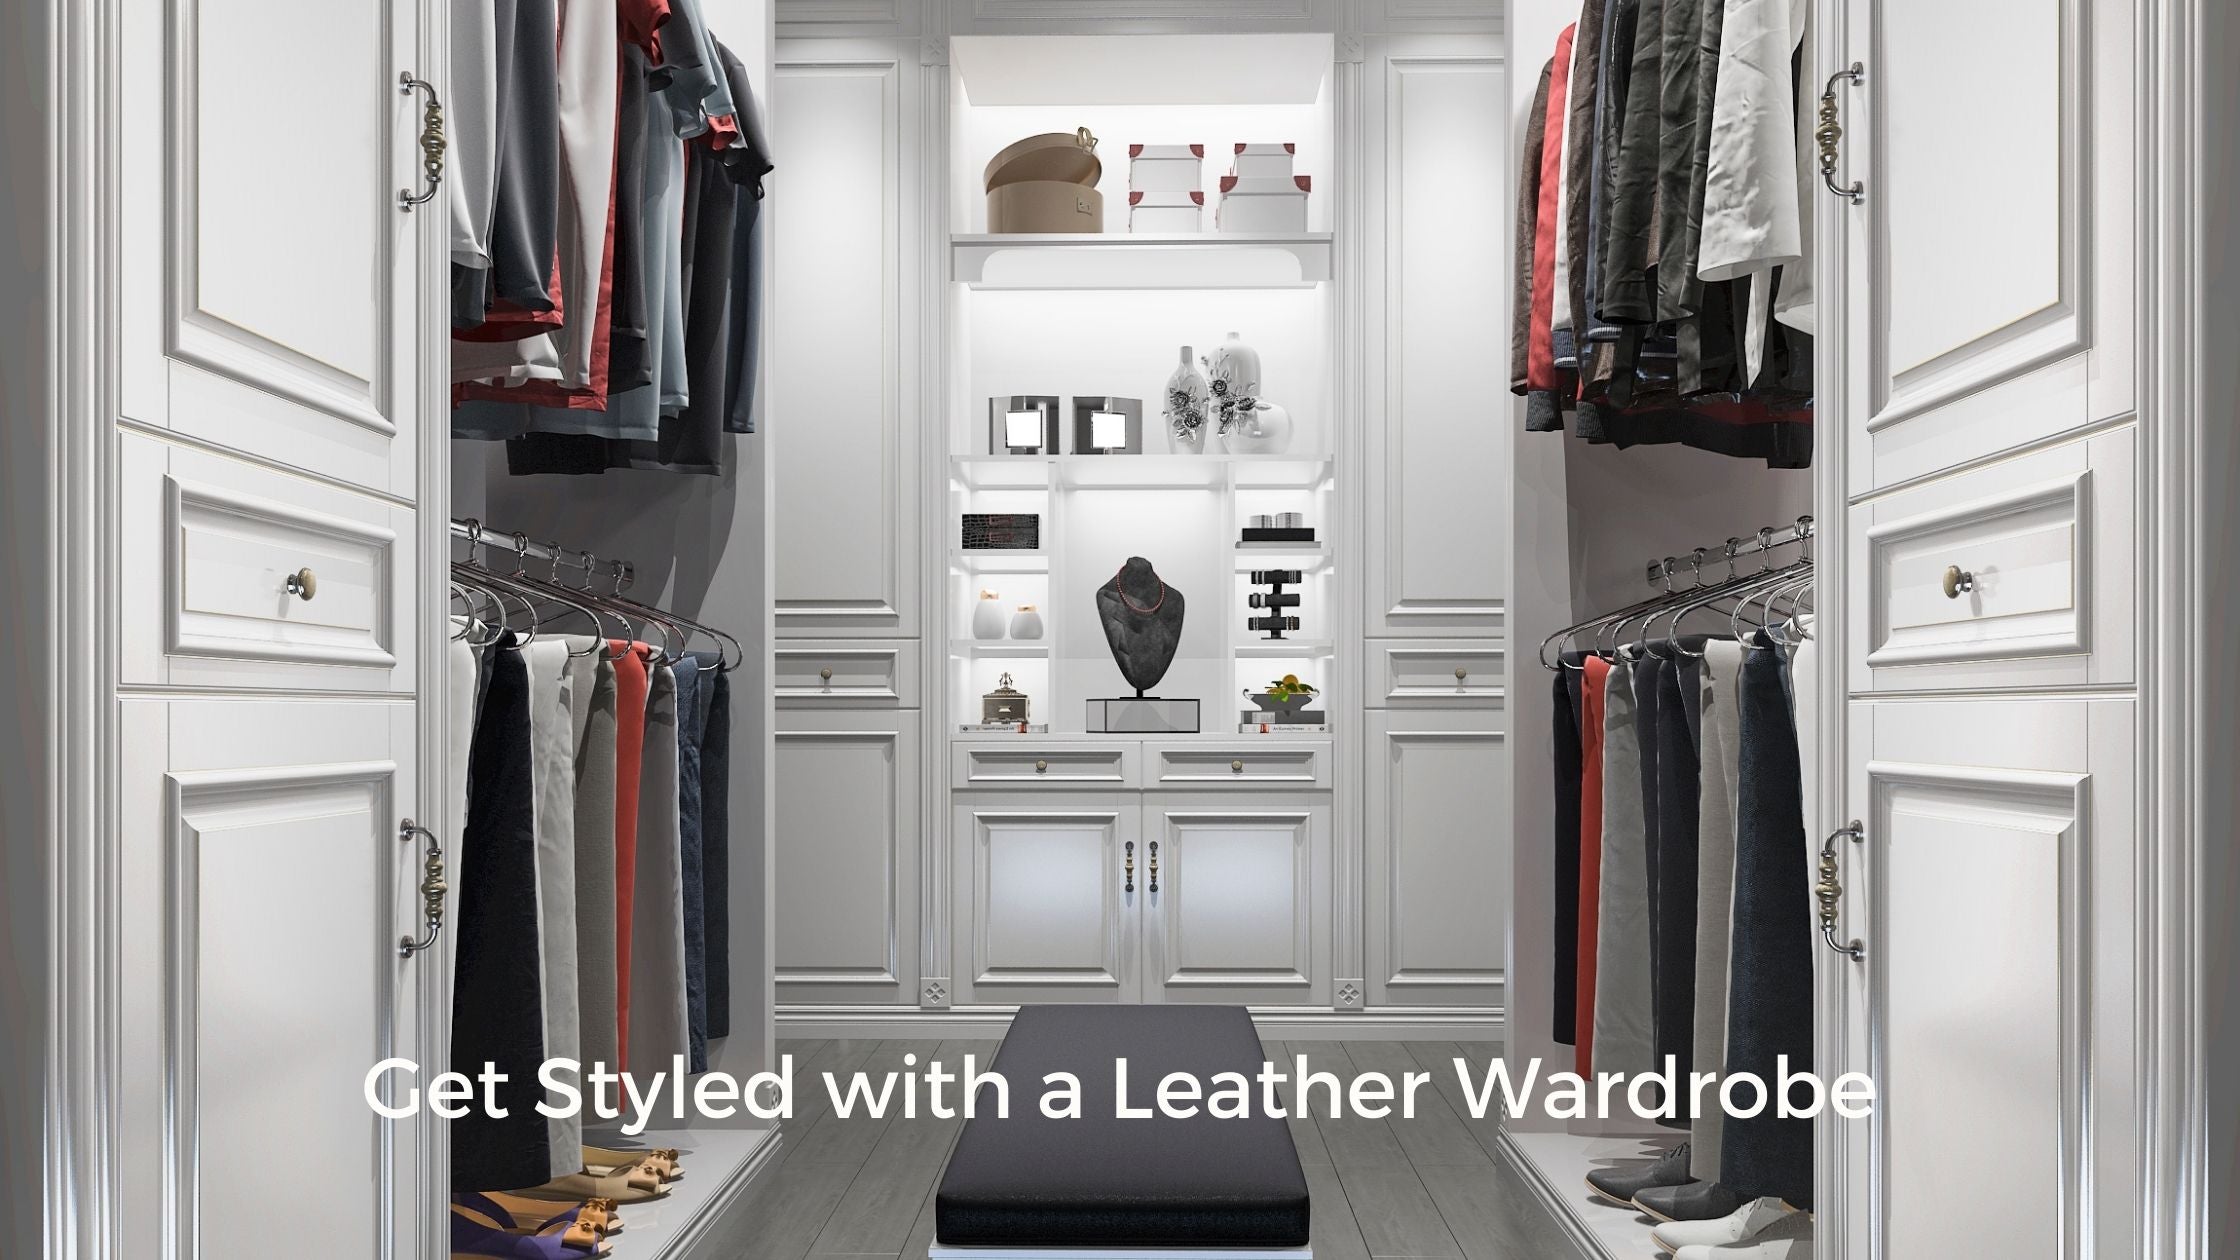 Get Styled with a Leather Wardrobe